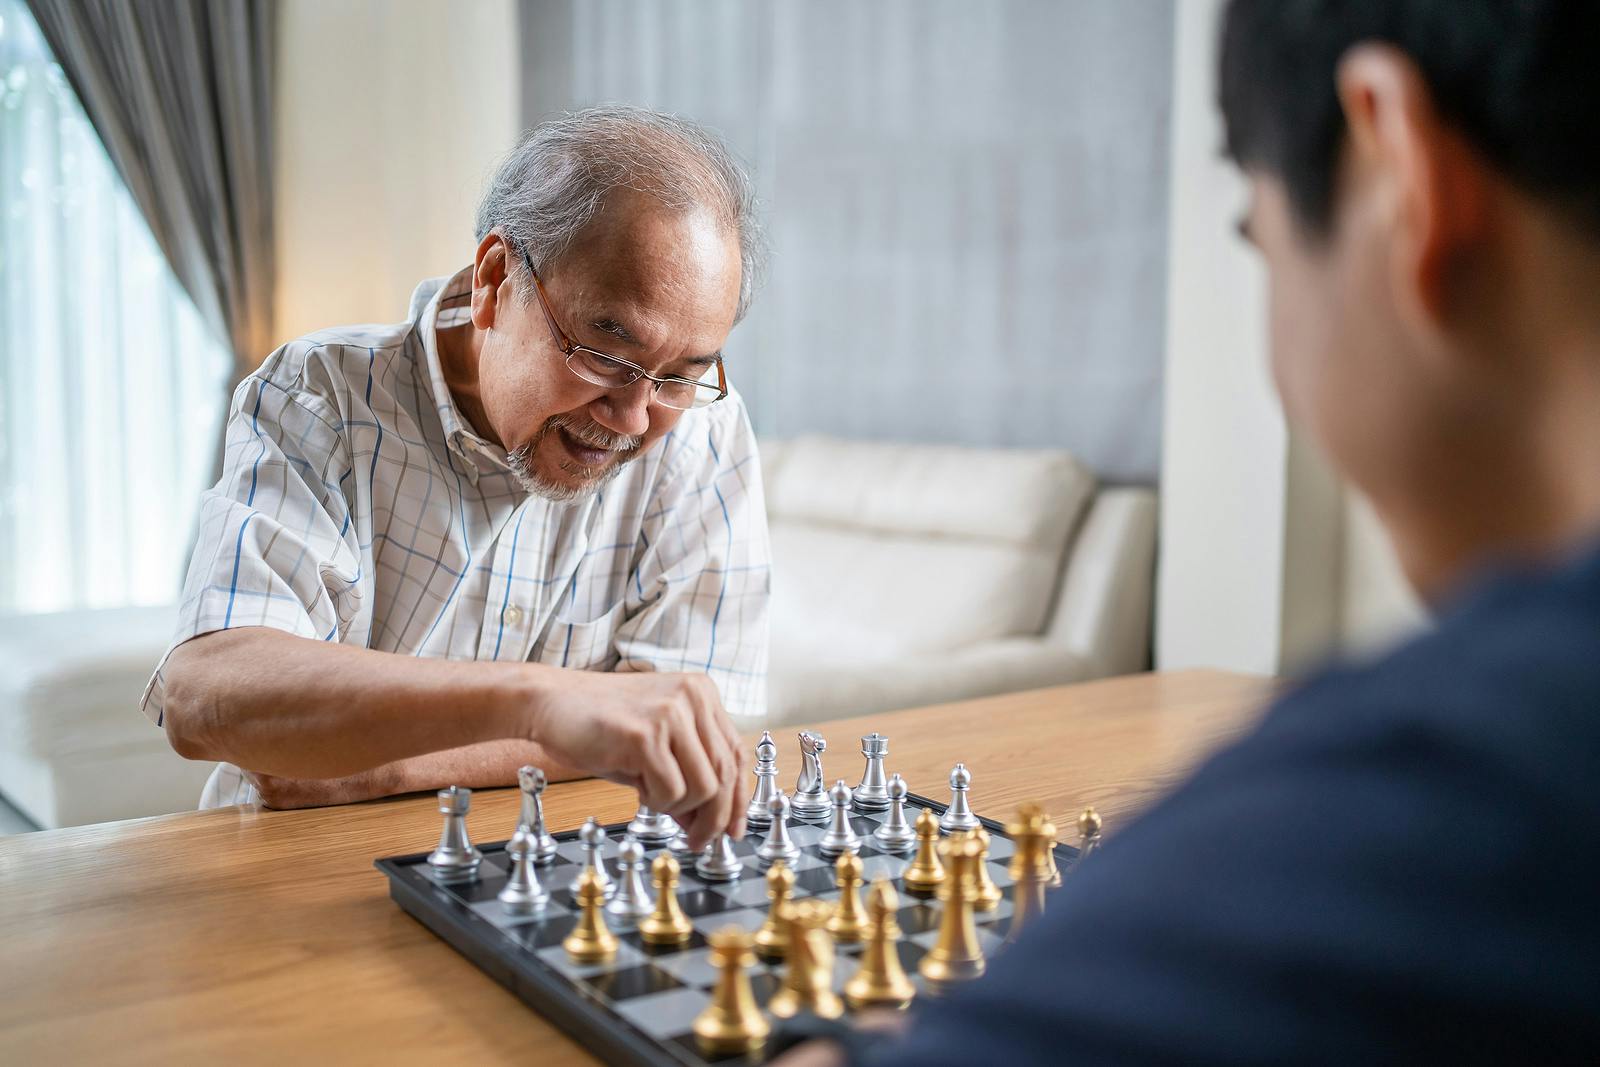 Older man playing chess. Mental activity can help keep your brain healthy so you stay sharp